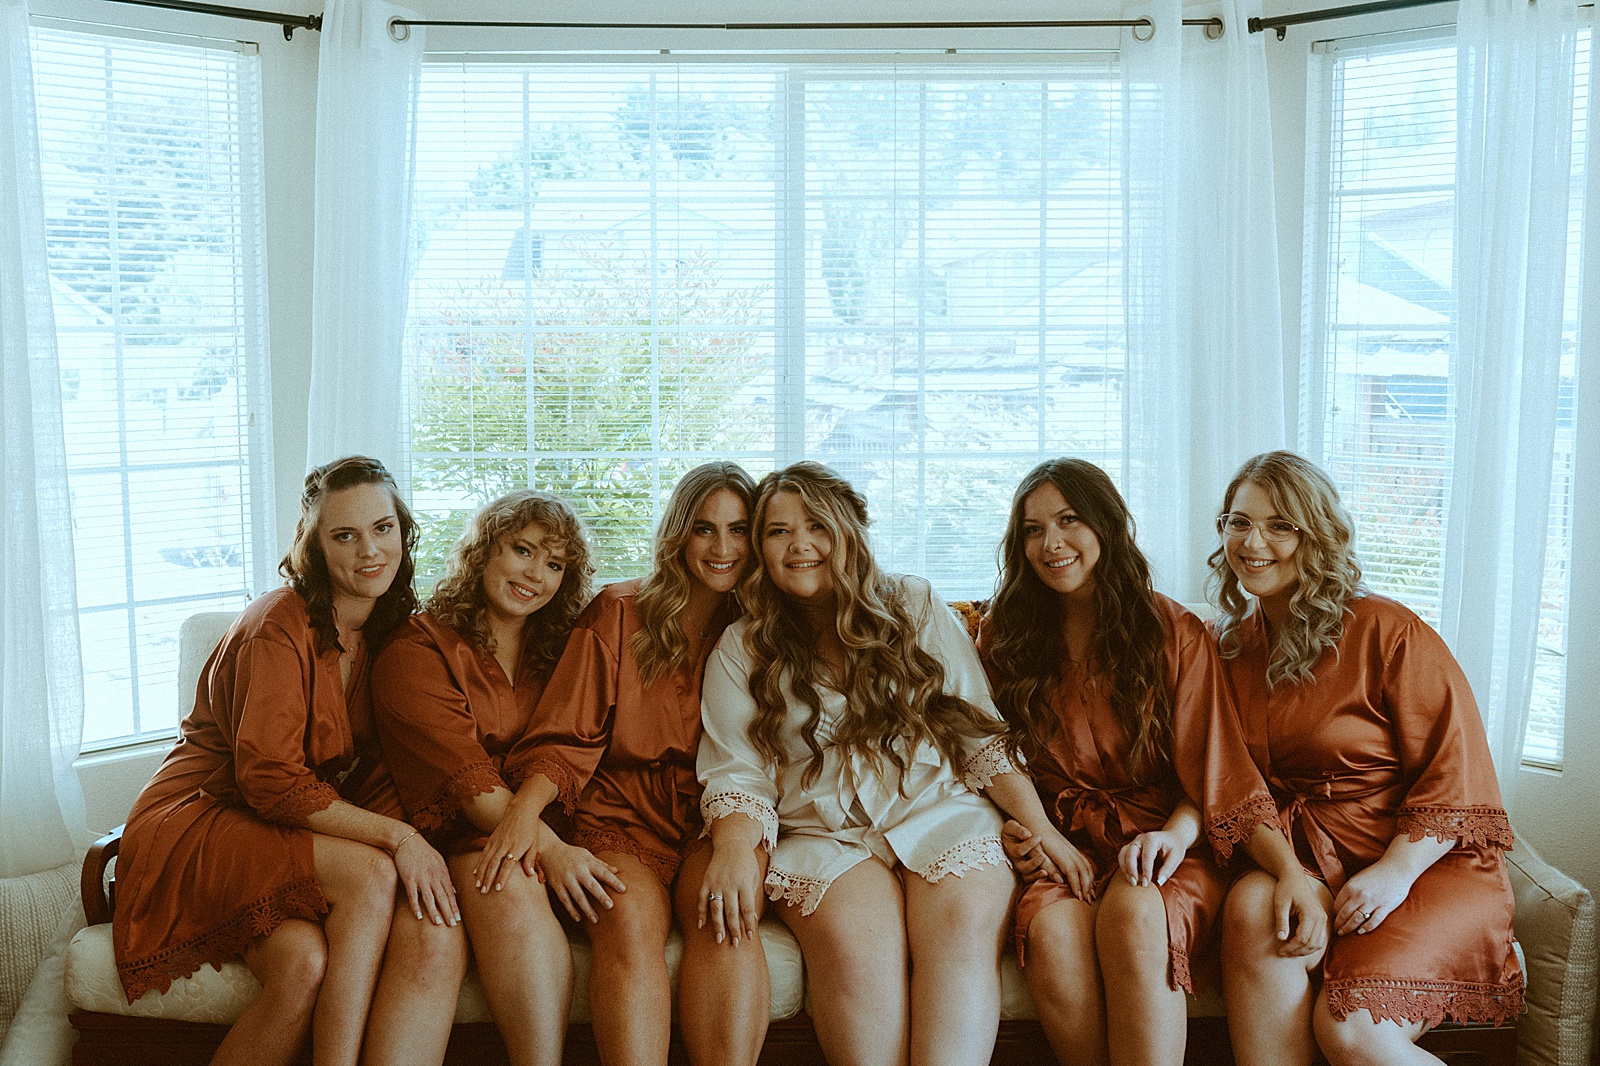 Bride and bridesmaids getting ready photos by Danielle Johnson Photography